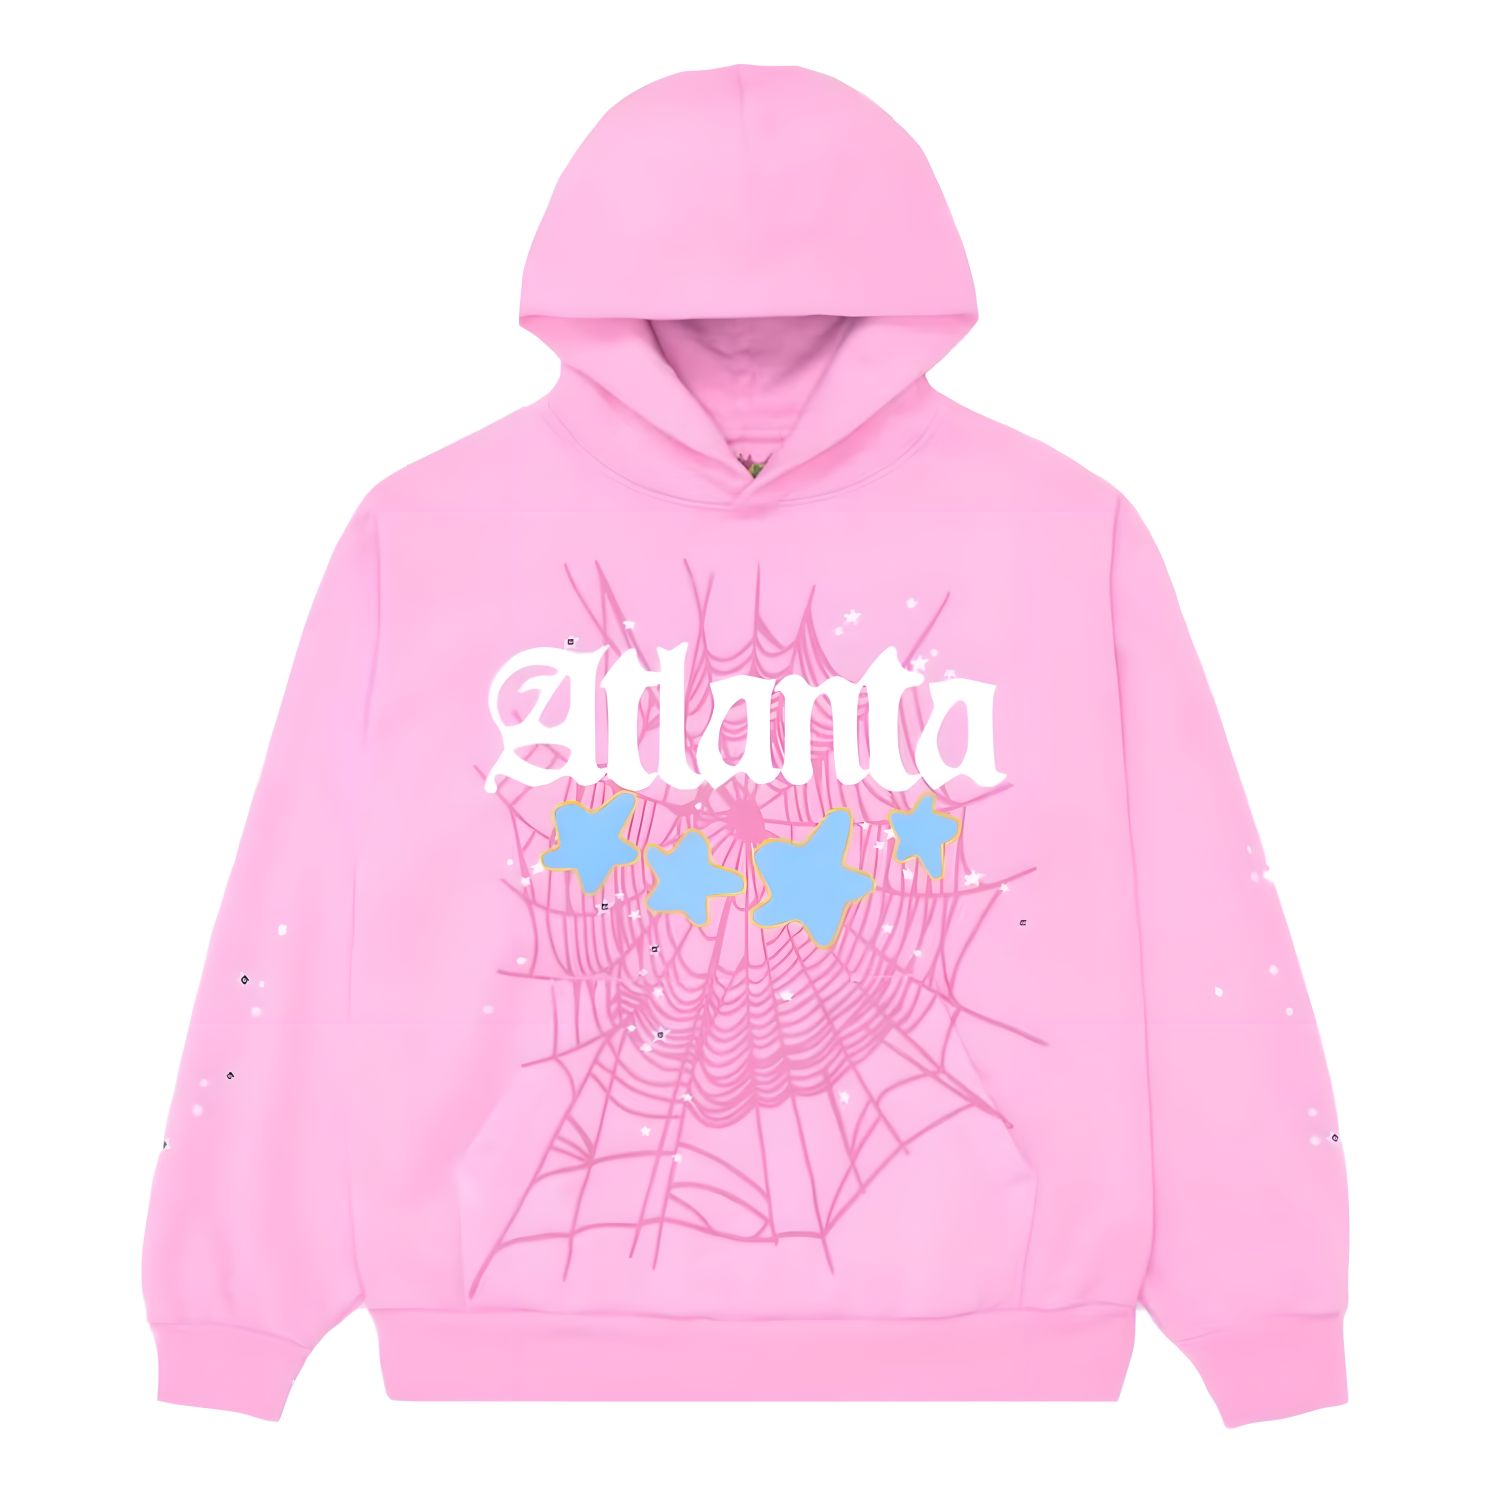 NEW Spider Worldwide × Young Thug Sp5der Red Pink Hoodie Sz S-XL 100%  AUTHENTIC